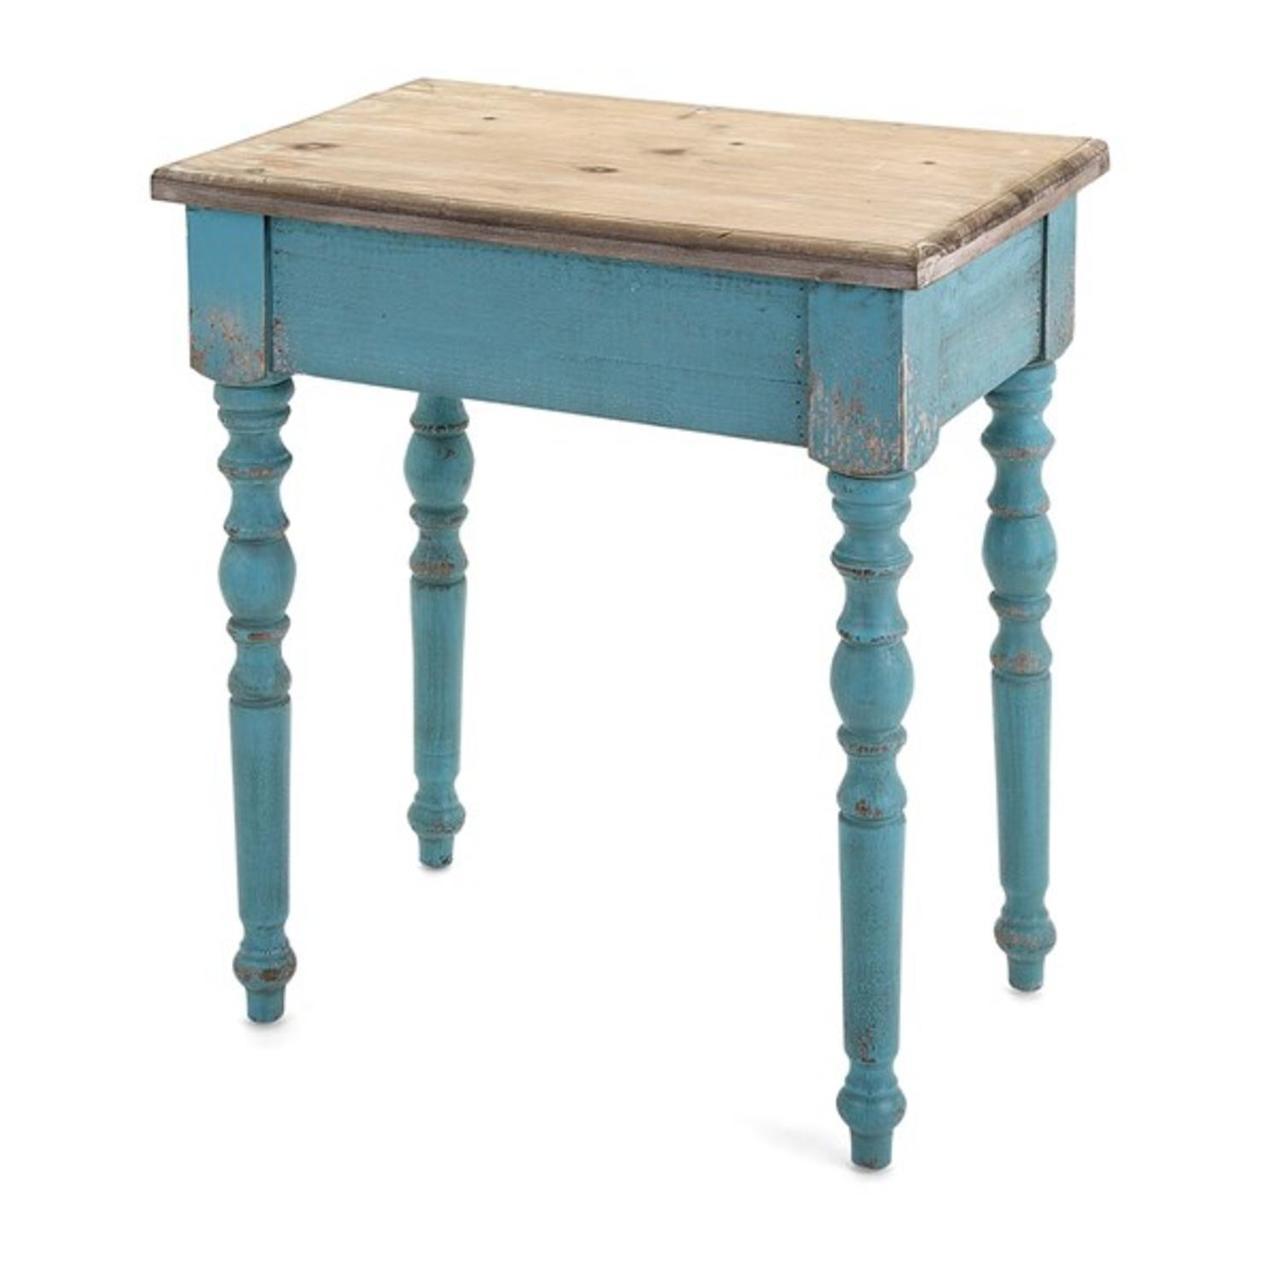 dark aqua blue light sandy brown distressed fir decorative accent table and bass drum pedal sideboard barn door cabinet battery touch lamp bench behind sofa beech nest tables diy